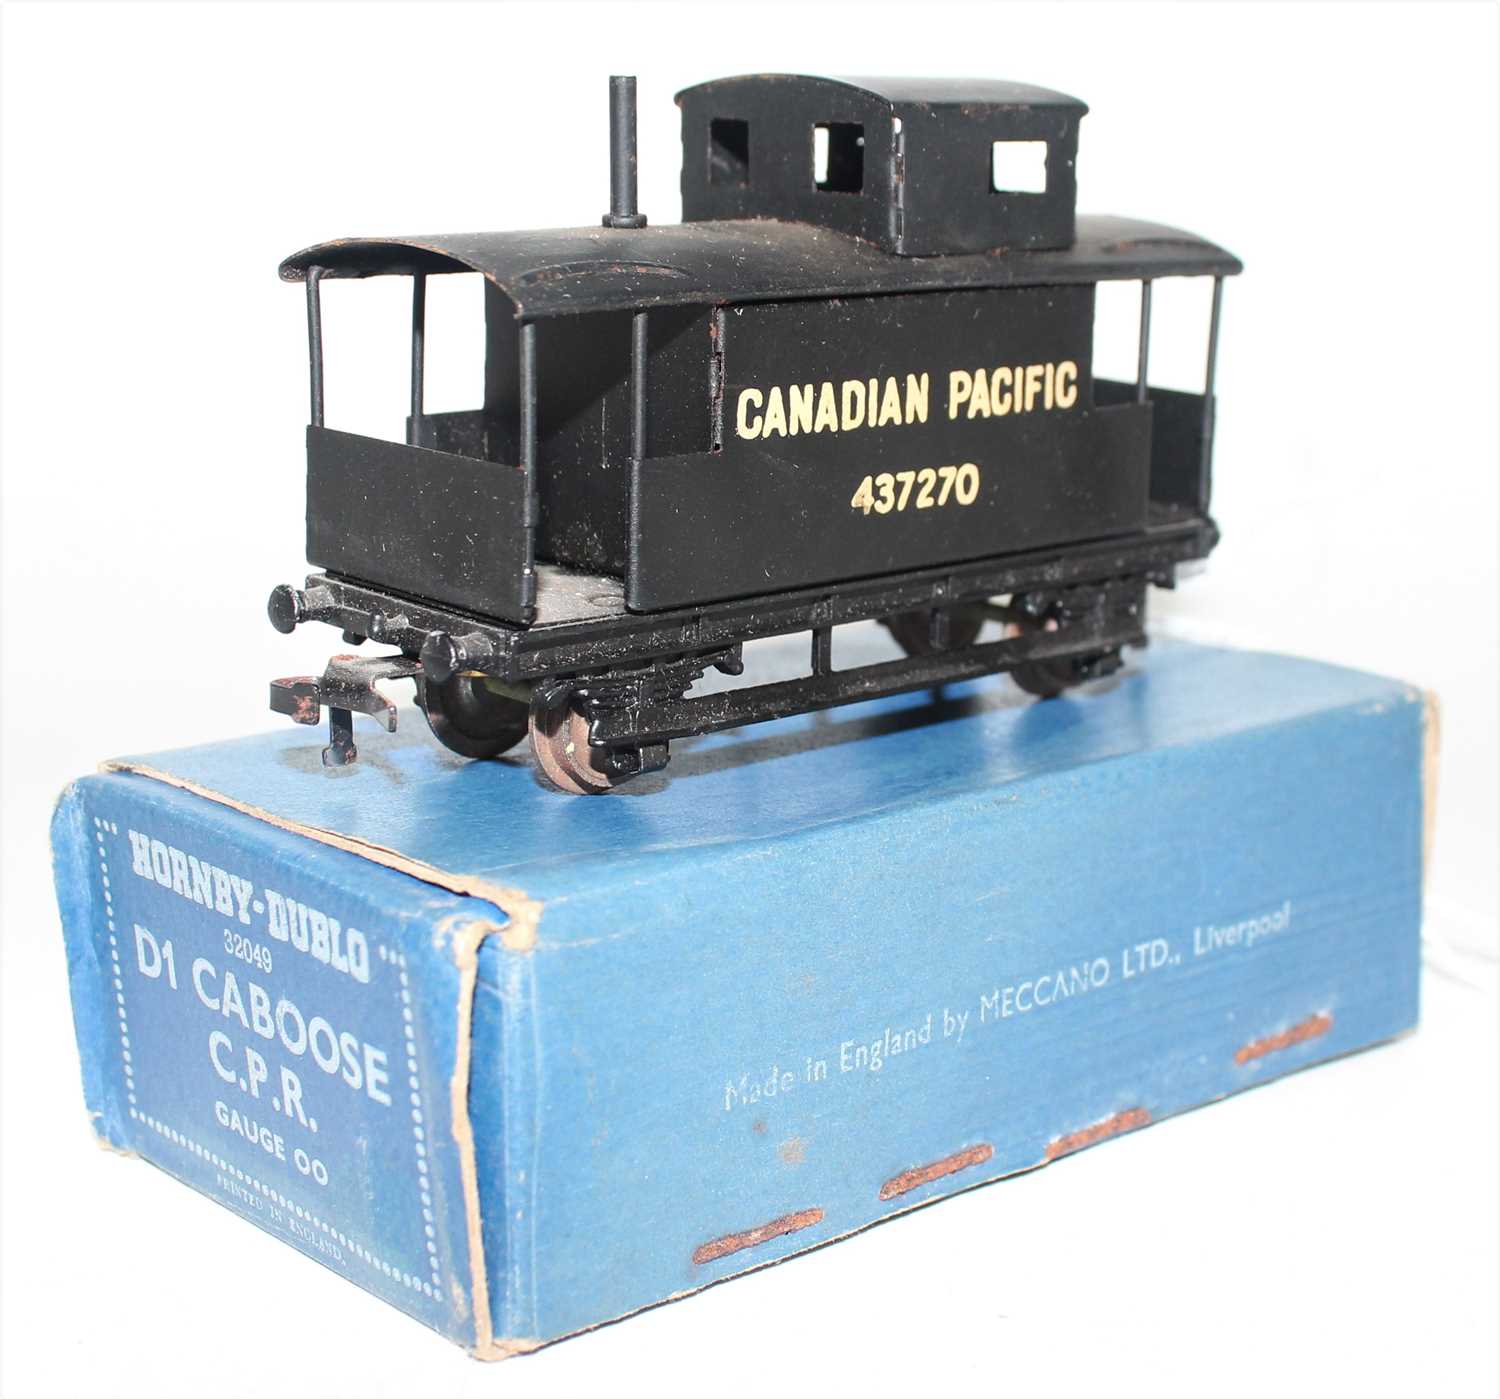 Hornby Dublo D1 Caboose for Canadian Pacific Railway, mid blue box (NM-BVG)